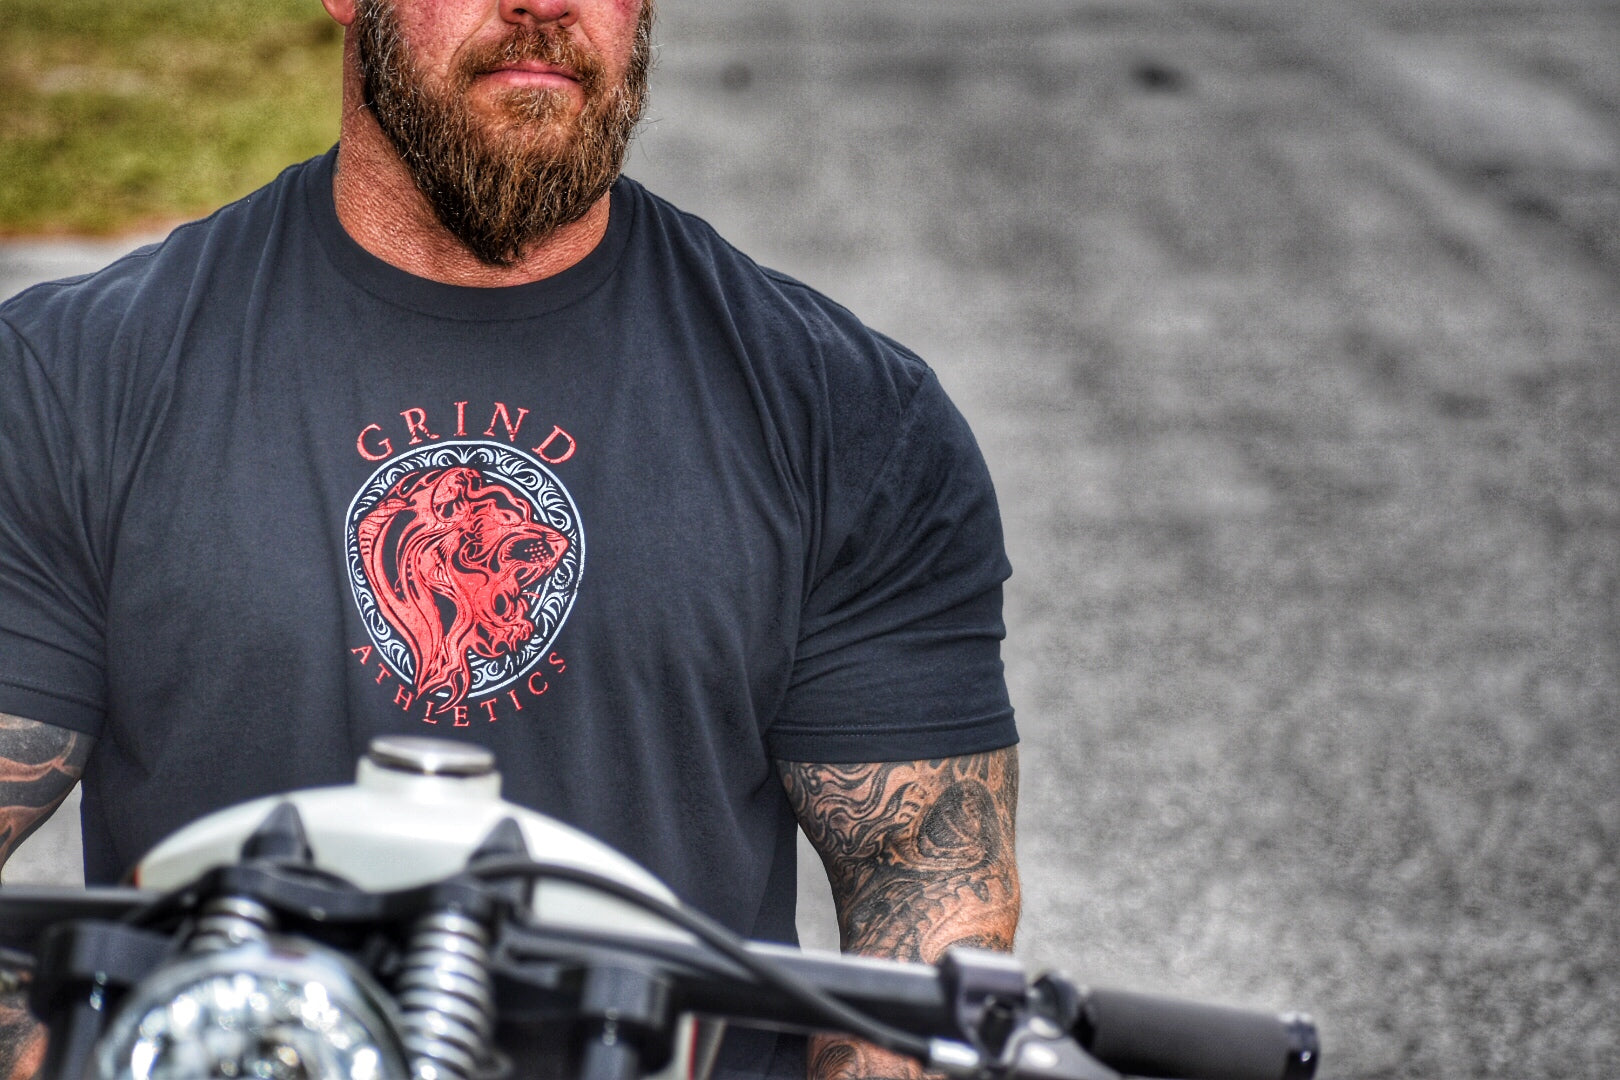 The Grind Athletics S / Vintage Black The Crown Doesn't Make You King - First Edition